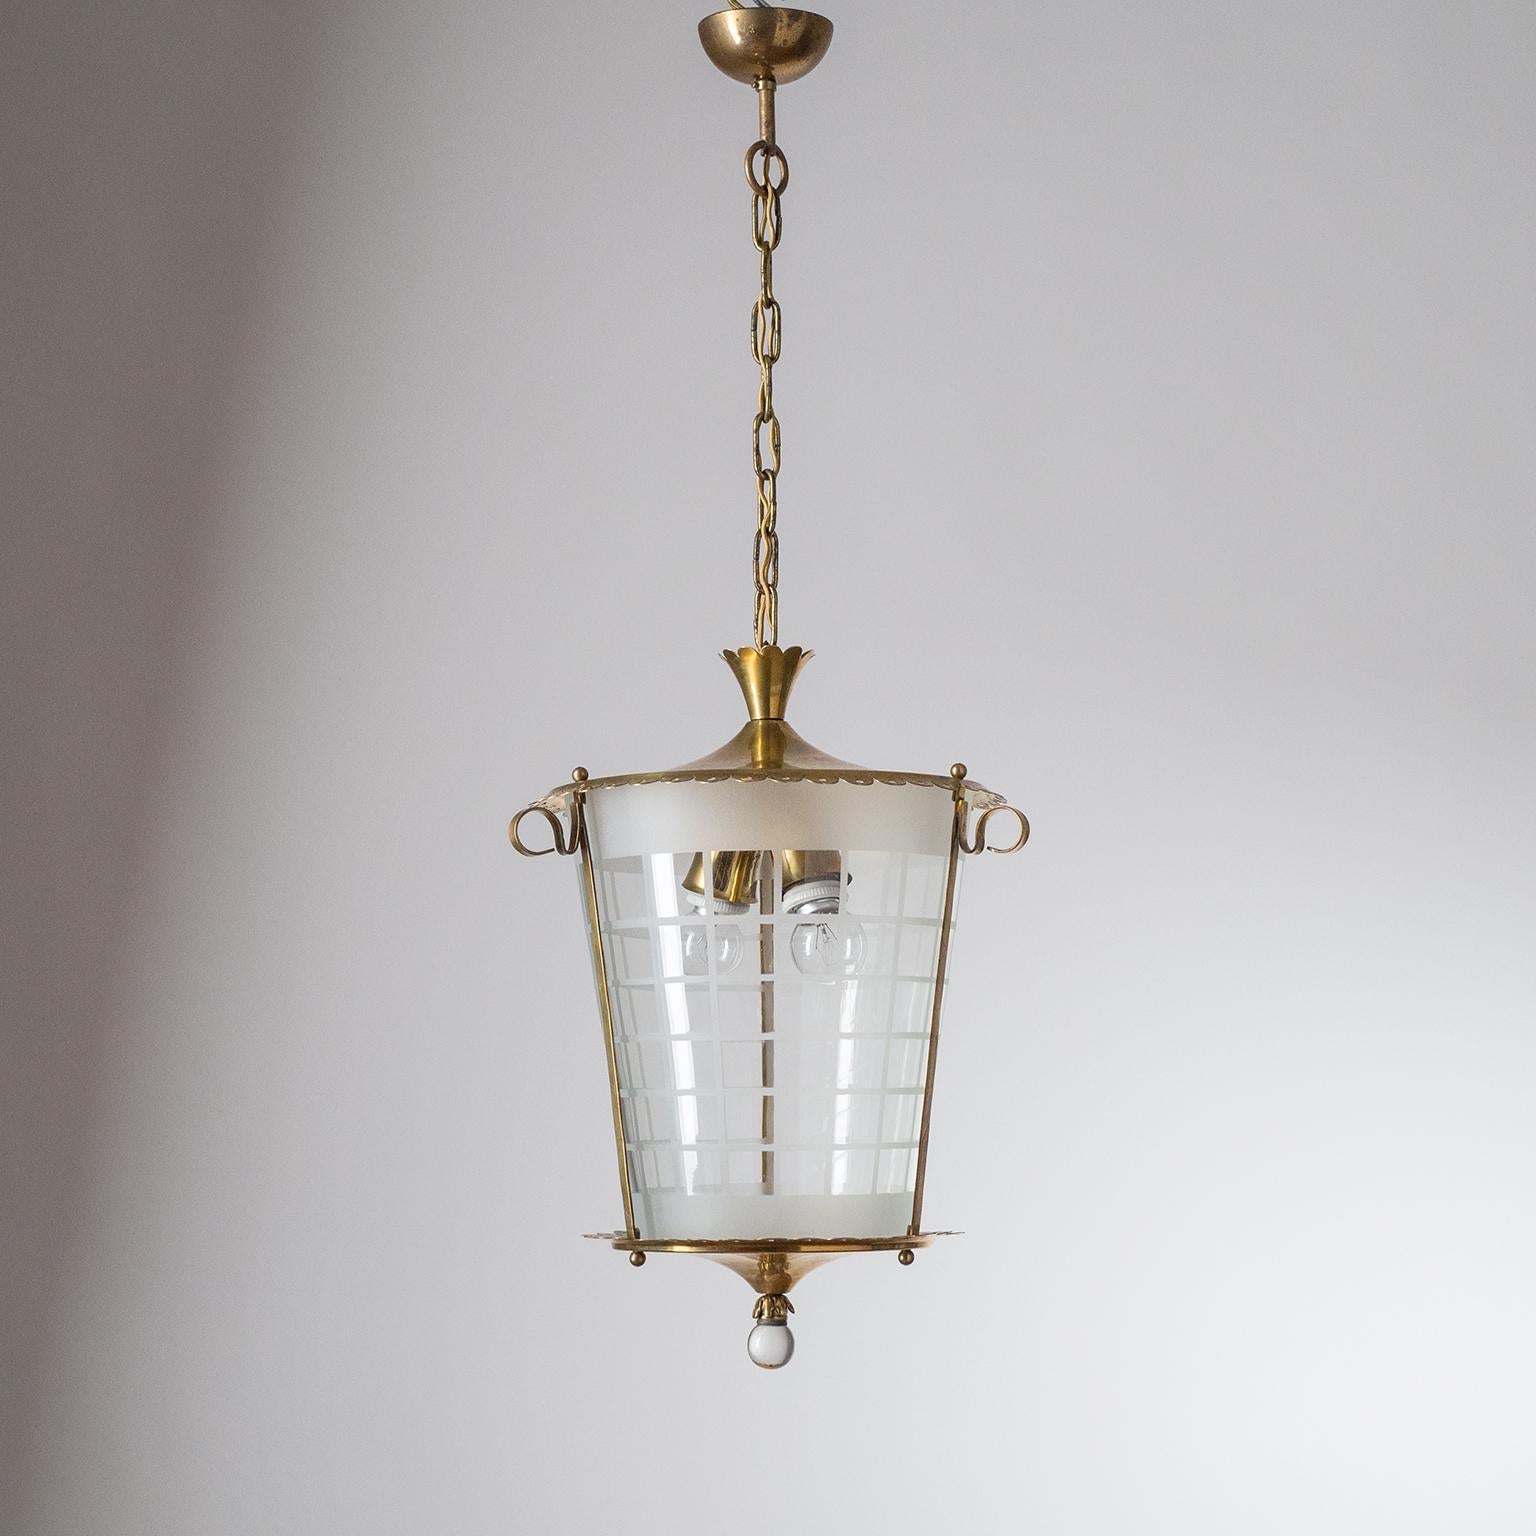 Fine Italian brass and glass lantern from the 1930s. Two original brass and ceramic E27 sockets with new wiring. Height without the chain is approximately 17inches/43cm.